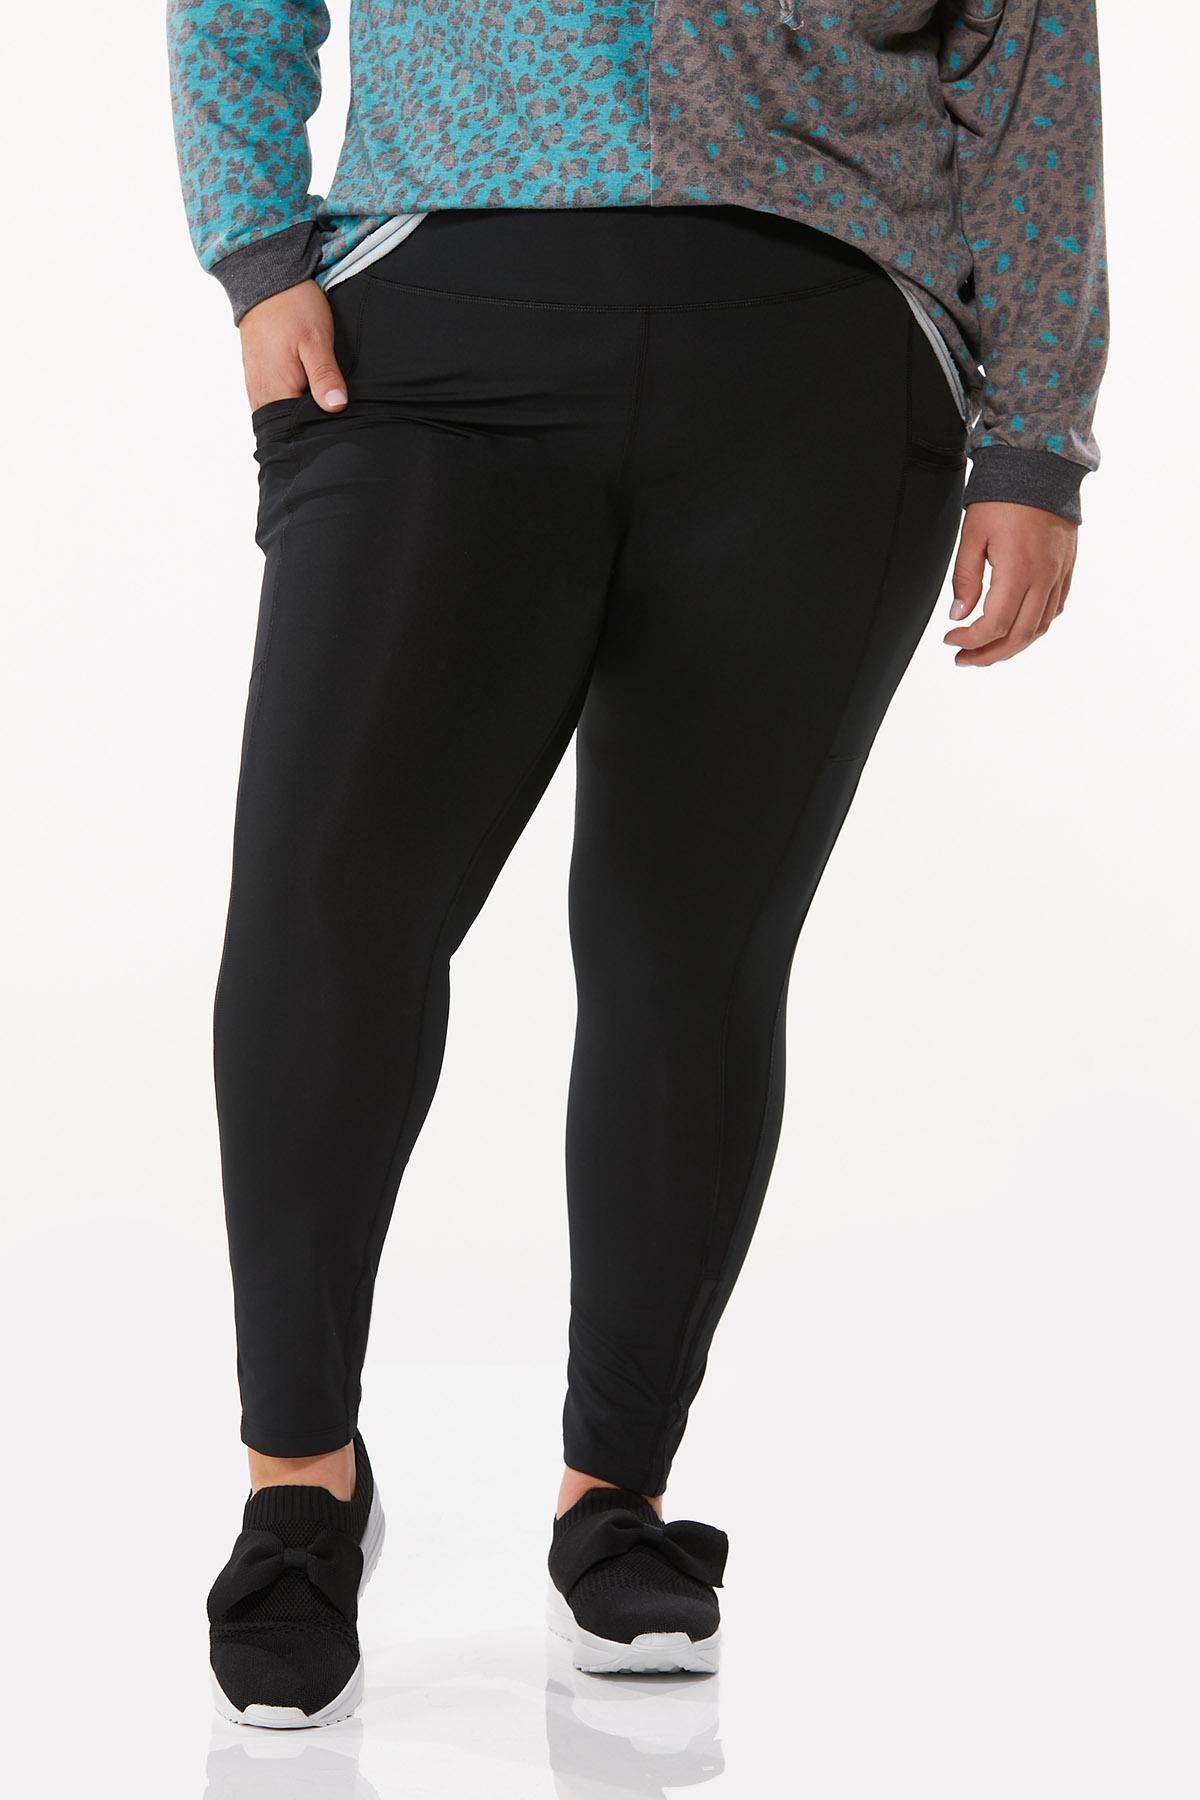 Only Play Plus Only Play Curvy workout legging in black - ShopStyle Pants